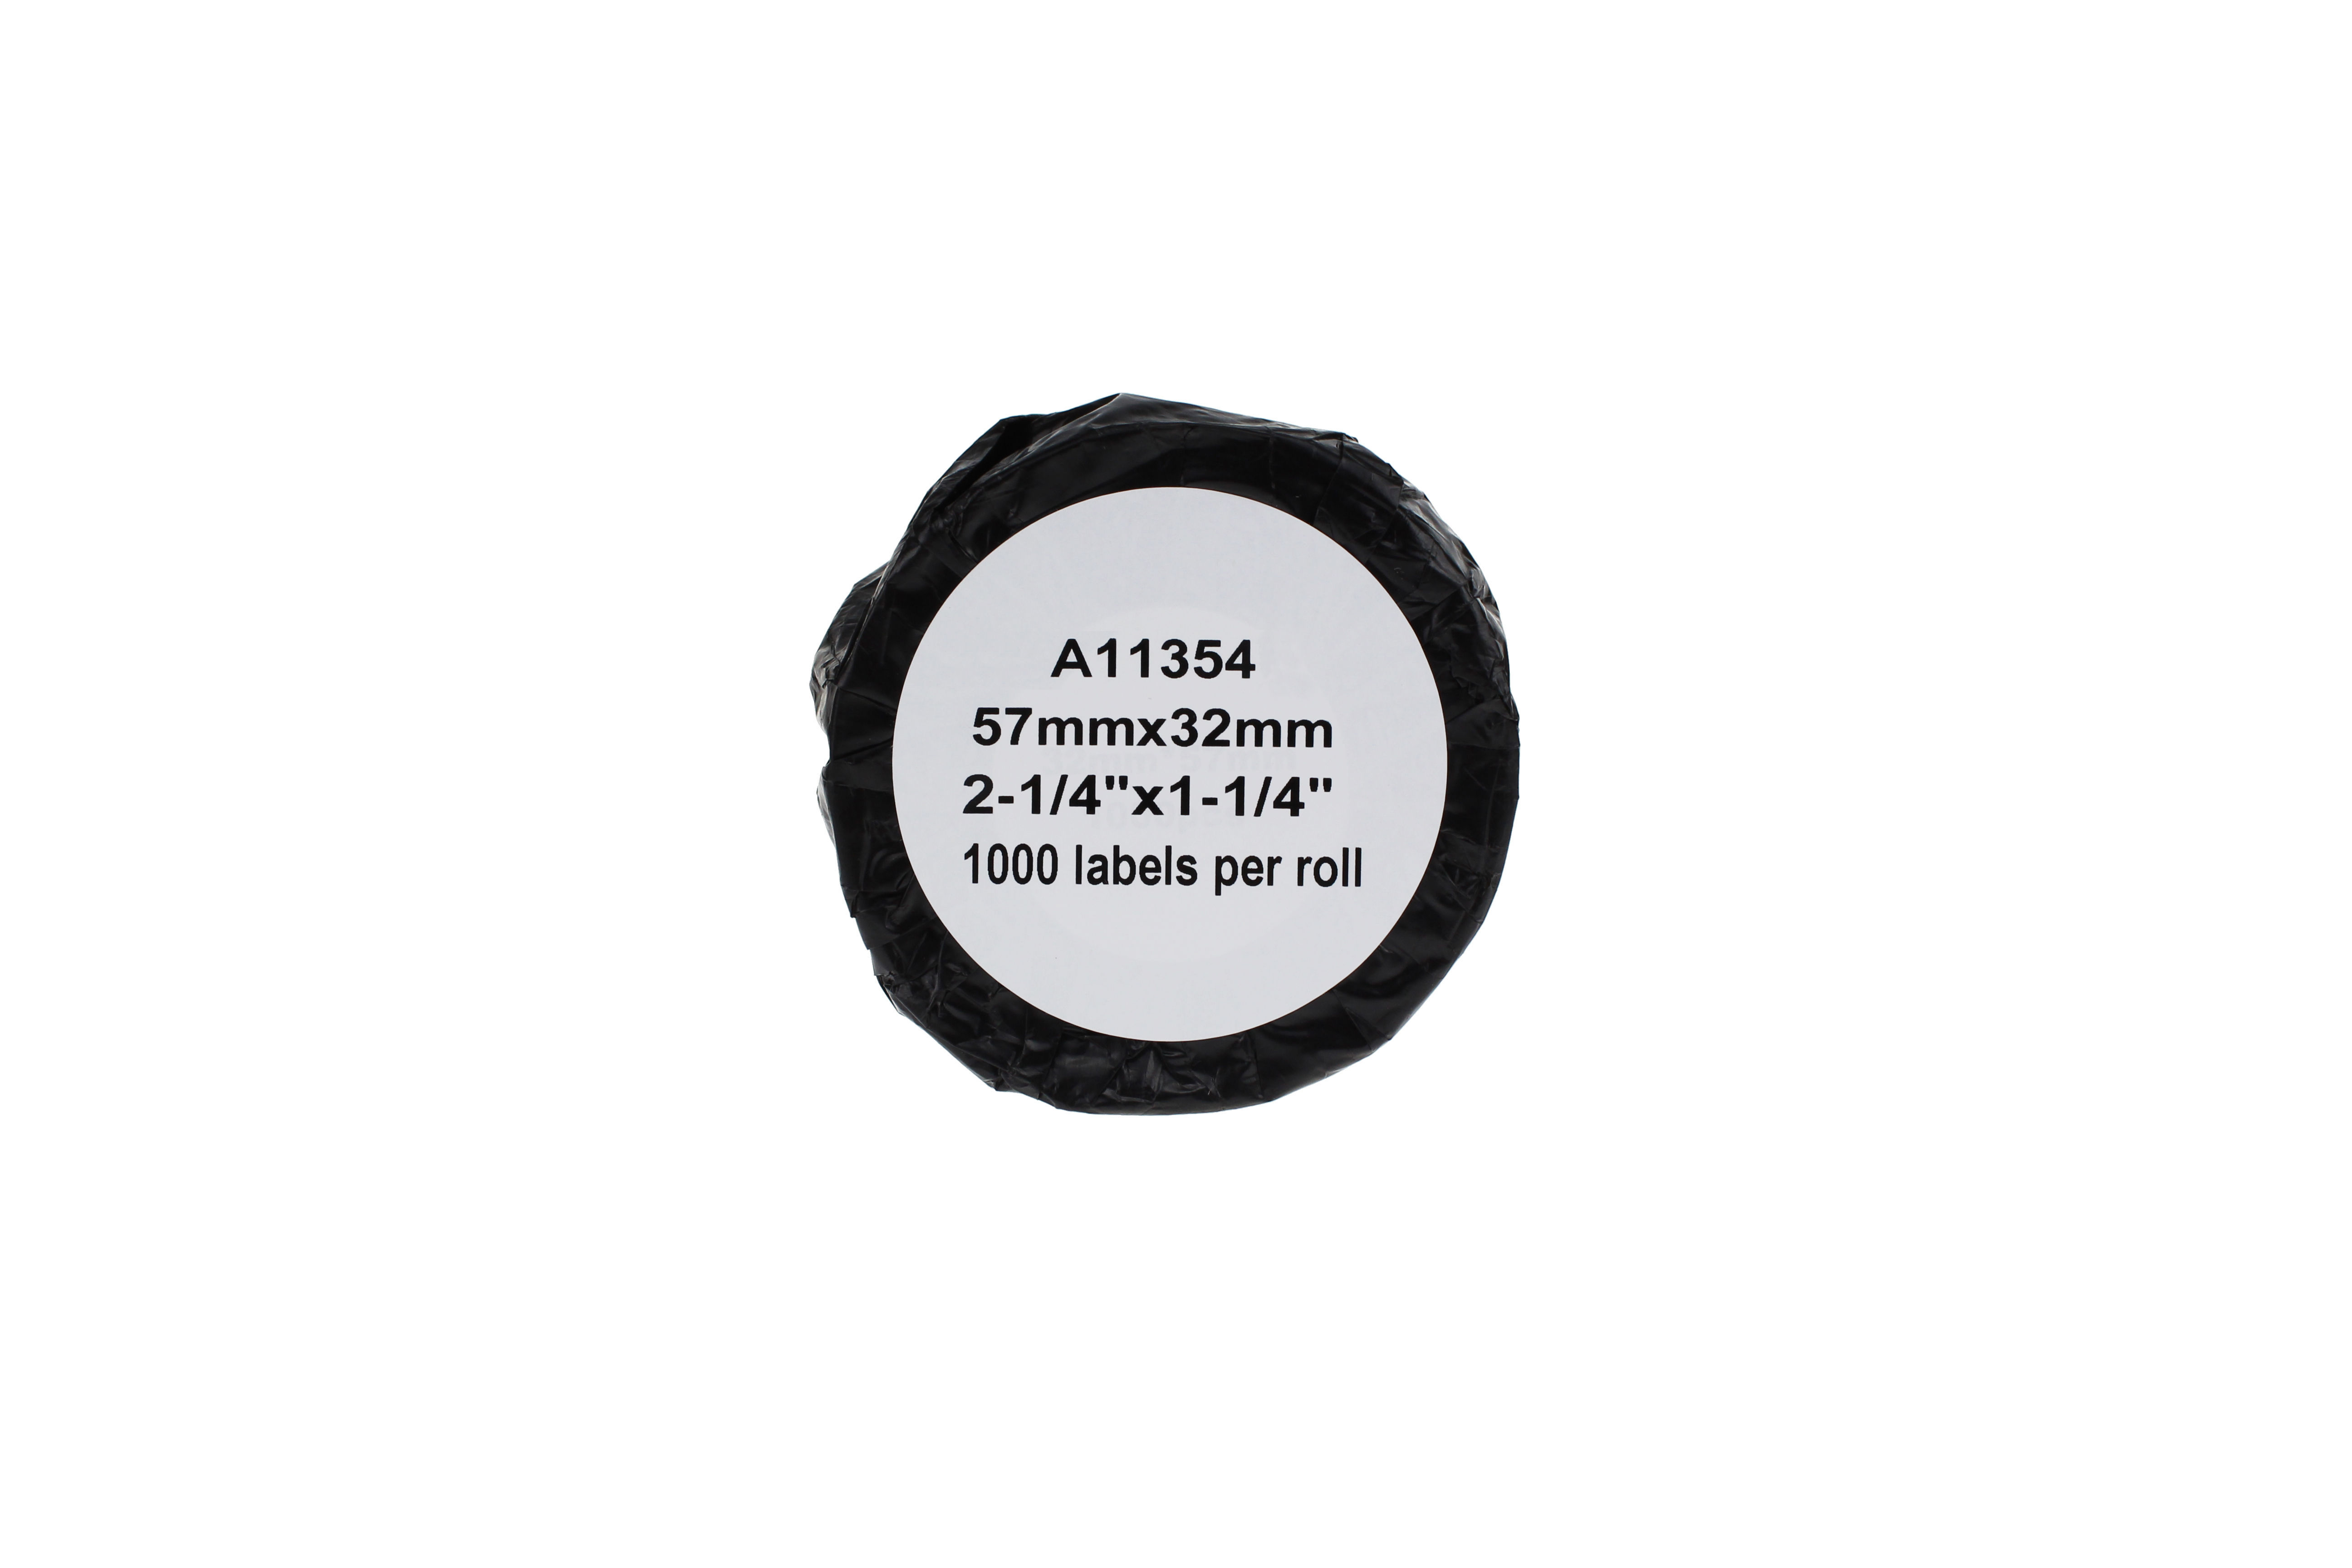 COMPATIBLE Dymo 11354 1000 labels Pack (32mm x 57mm)